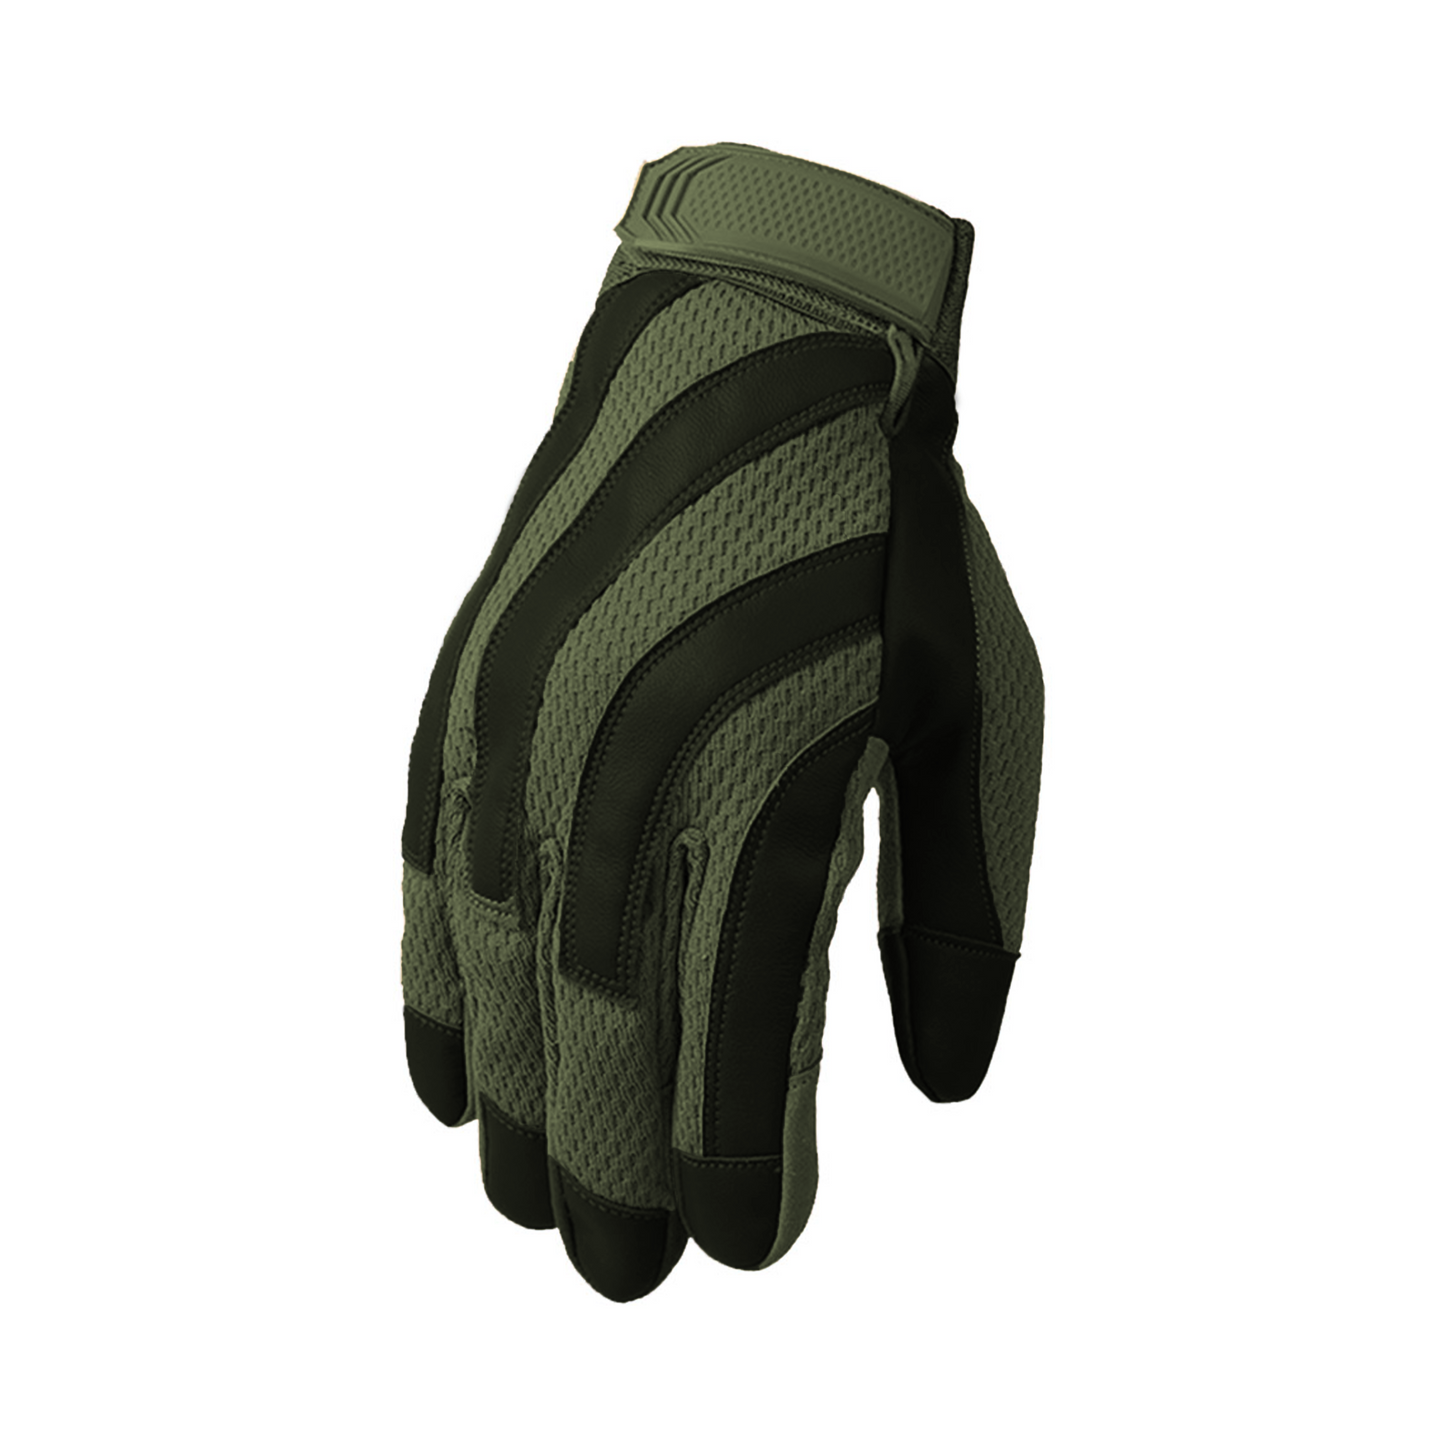 IJ Tactical Shooting Gloves